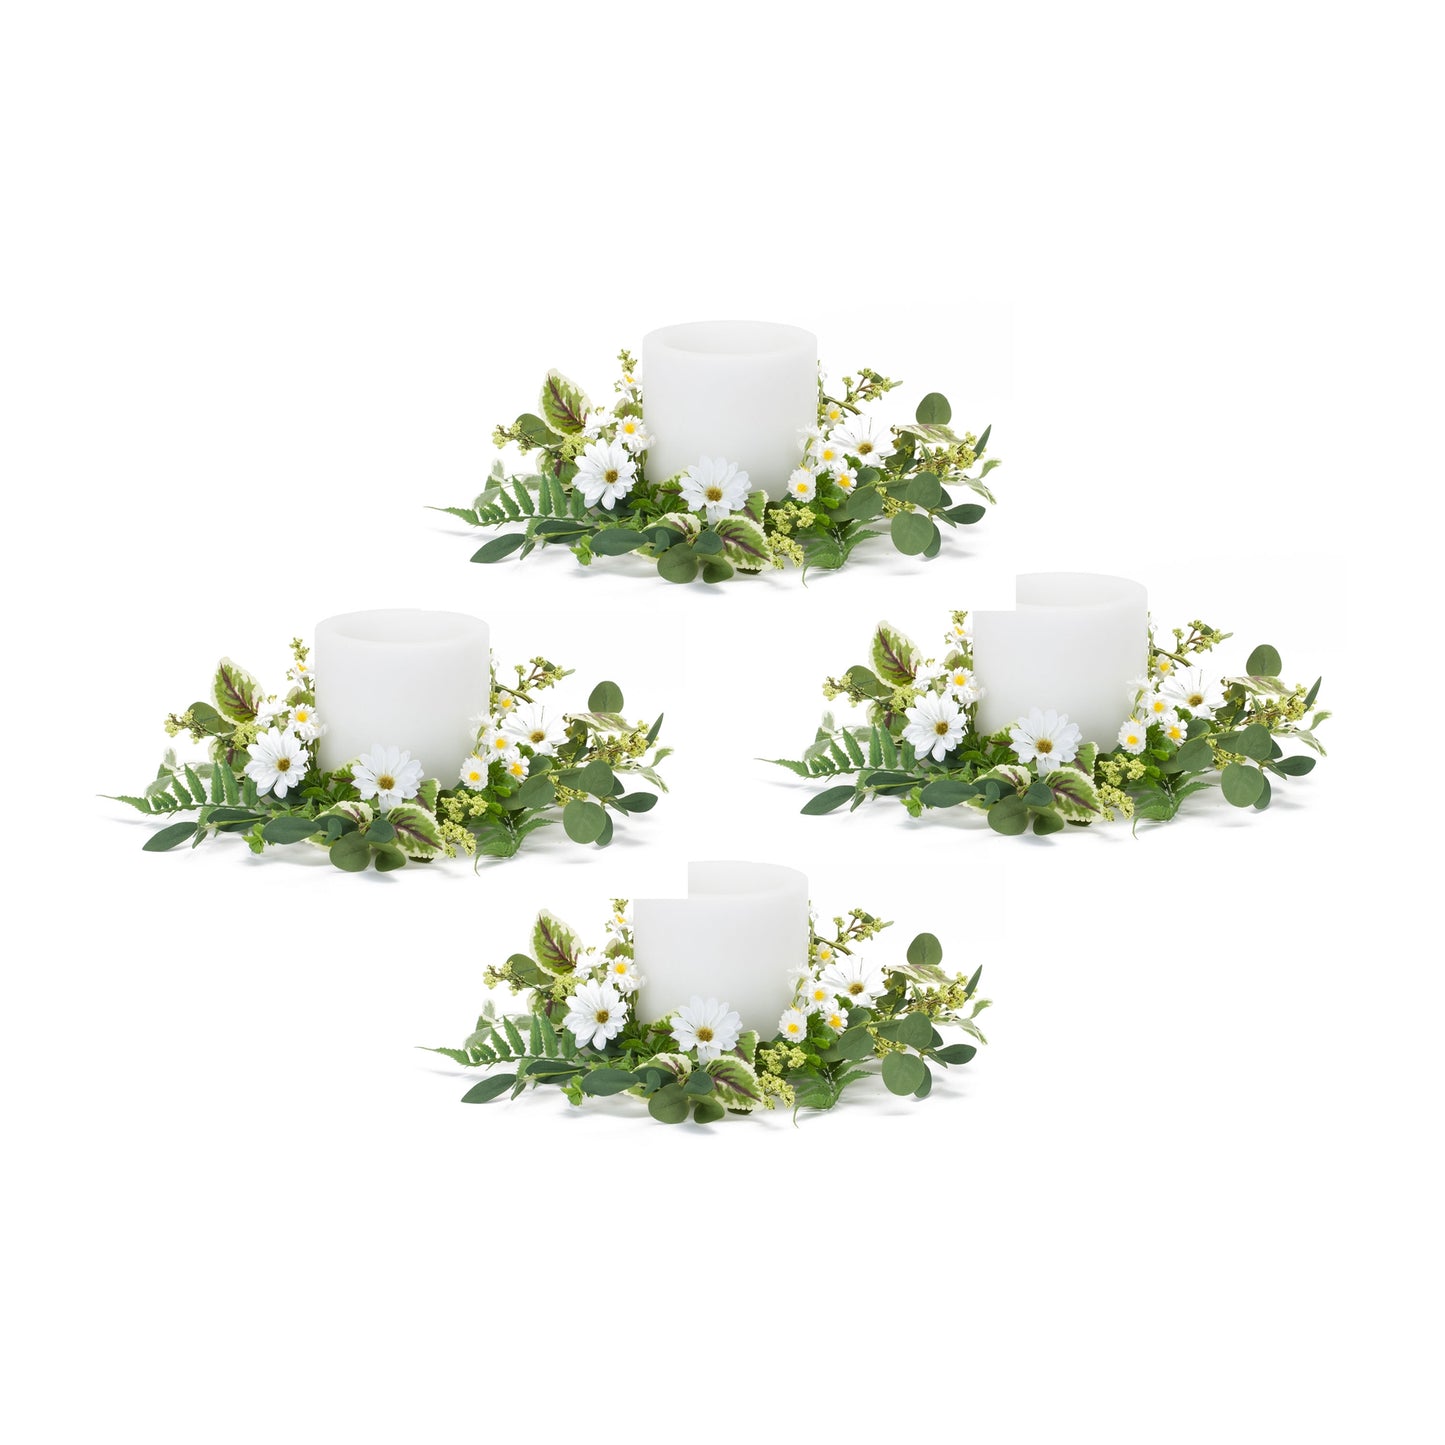 Mixed Floral Wreath (Set of 4) 17"D Polyester/Plastic